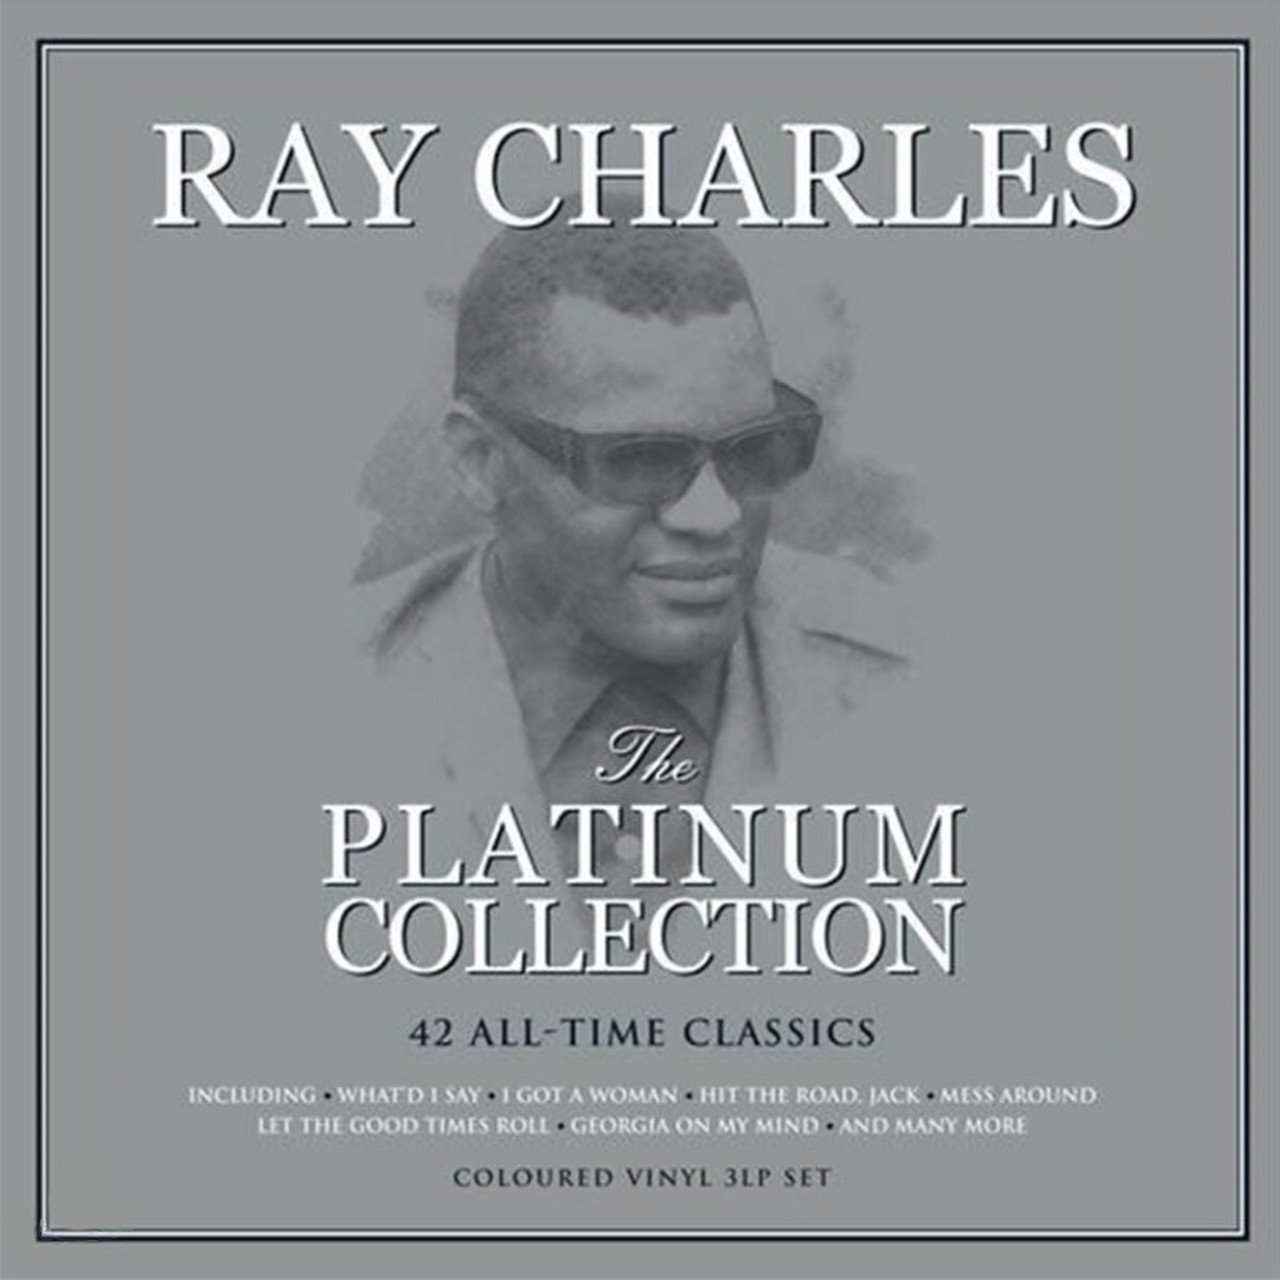 Джаз FAT RAY CHARLES, THE PLATINUM COLLECTION (180 Gram White Vinyl) household fetal doppler baby prenatal heart monitor lcd display fetus voice meter pregnant woman daily care product